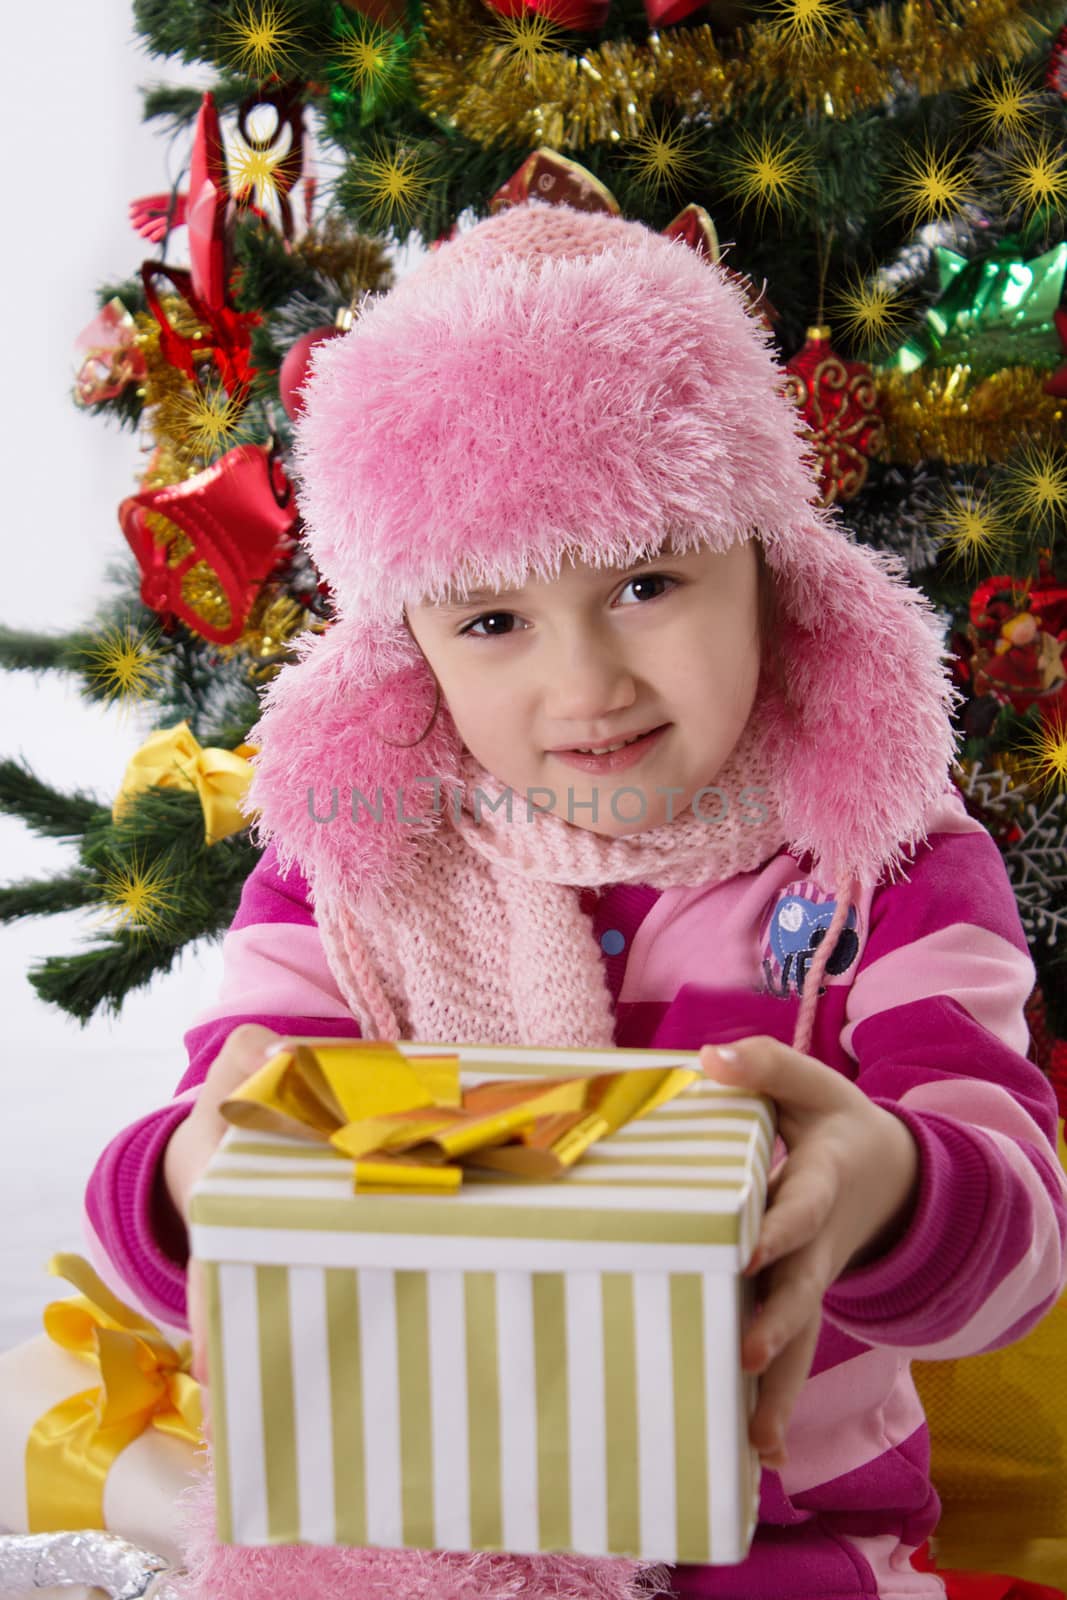 Pretty girl in pink fur hat holding present under Chritmas tree